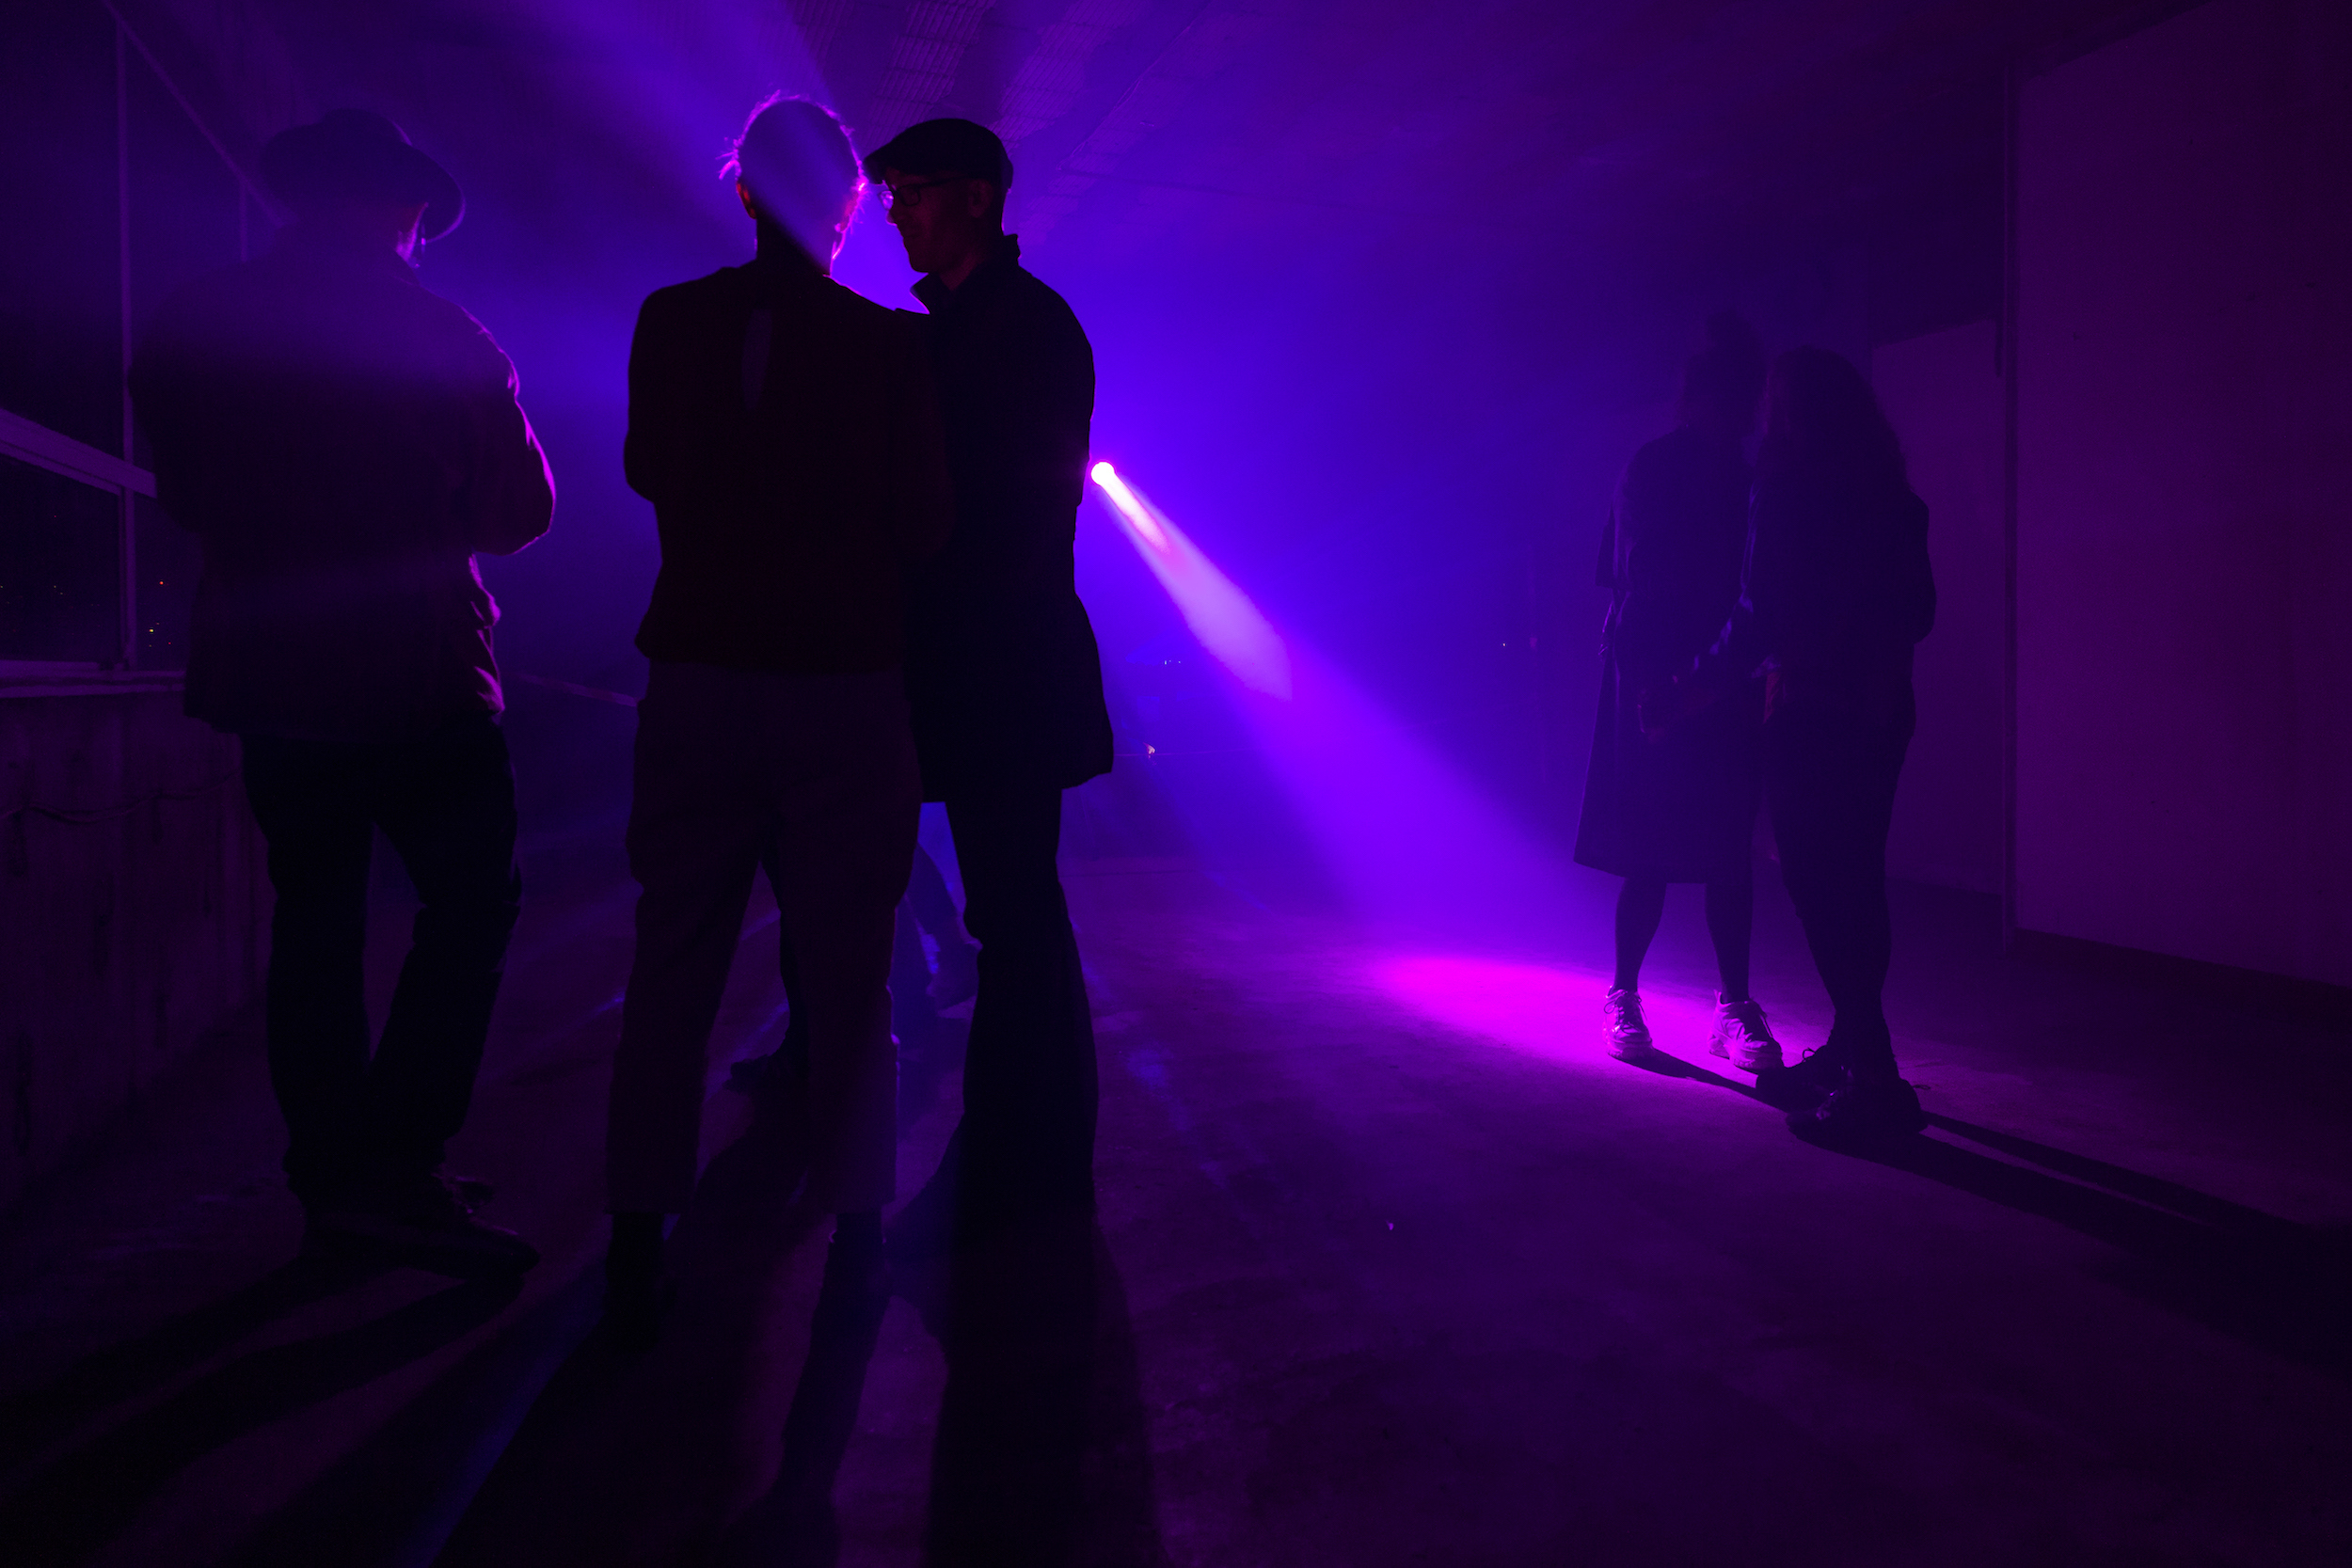 Dark room with purple lighting and silhouettes of a few people in the foreground